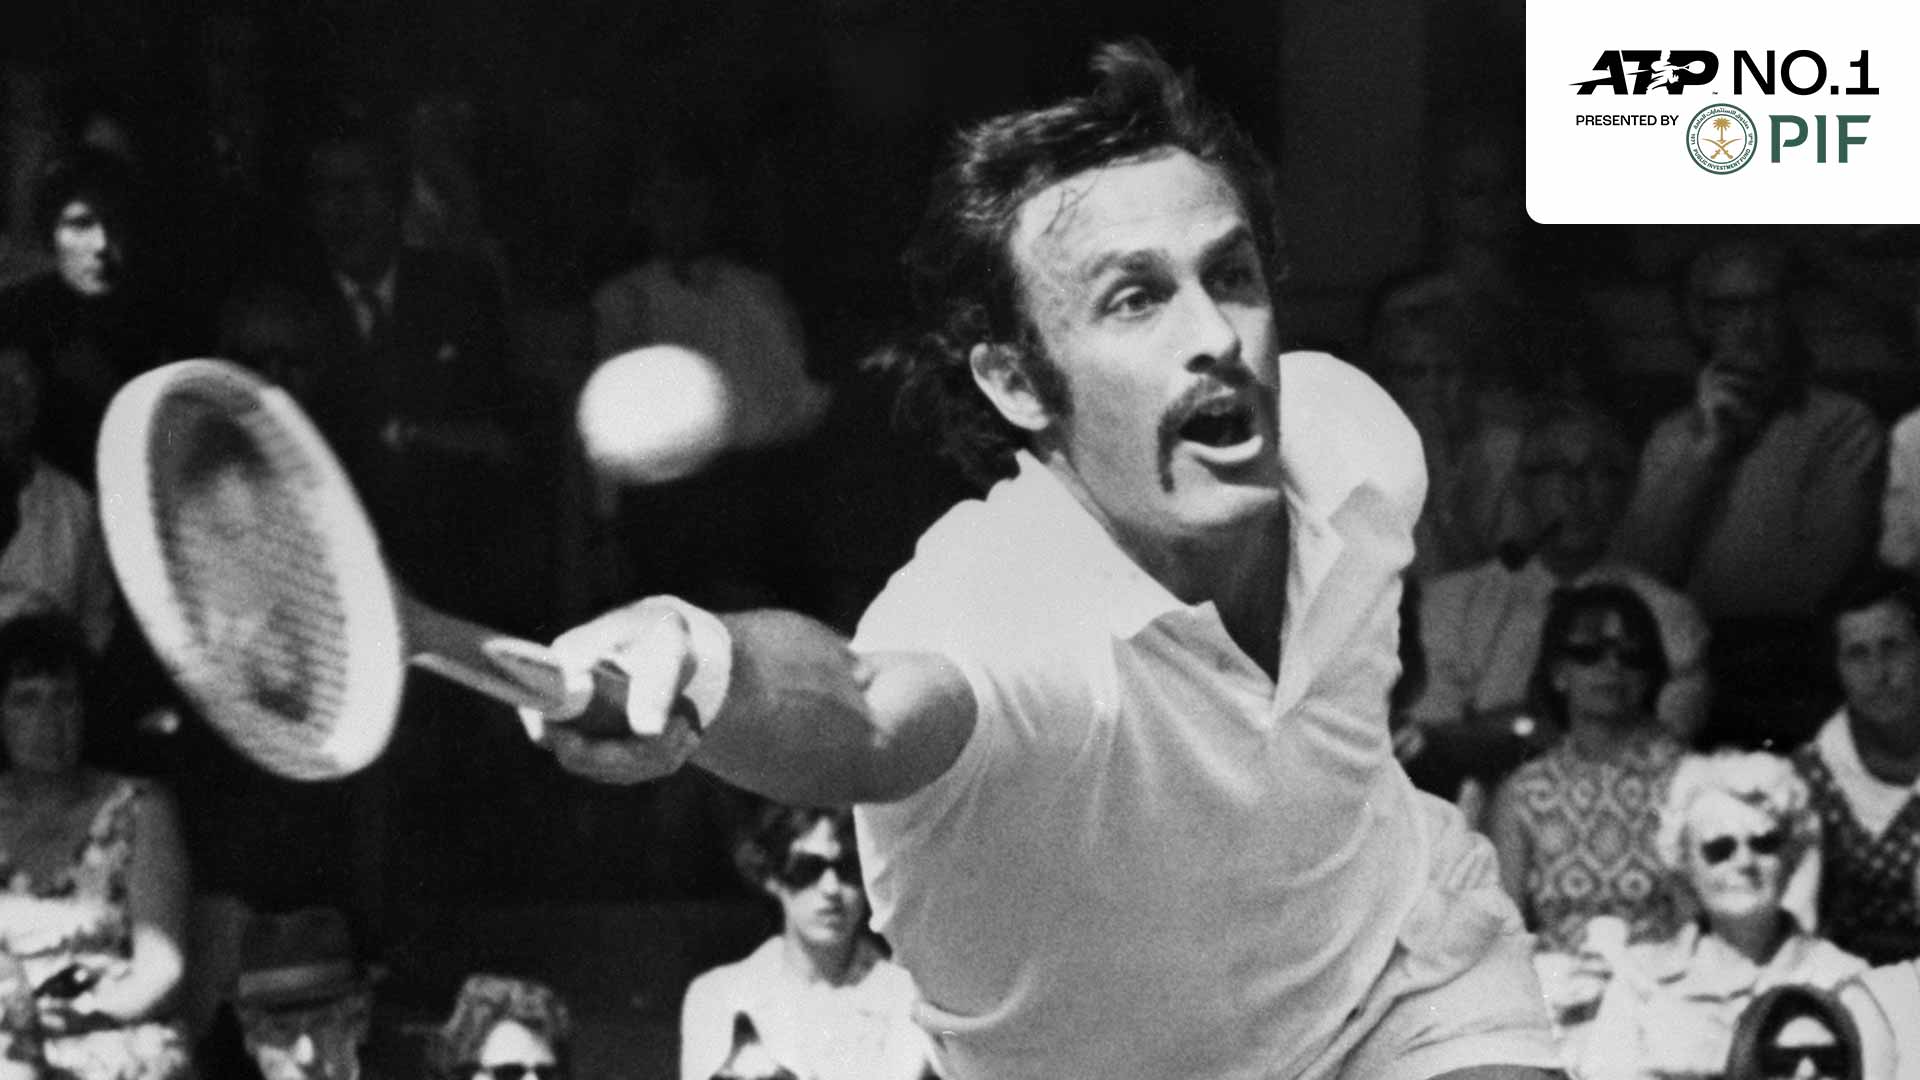 John Newcombe became the second No. 1 in the PIF ATP Rankings on 3 June 1974.